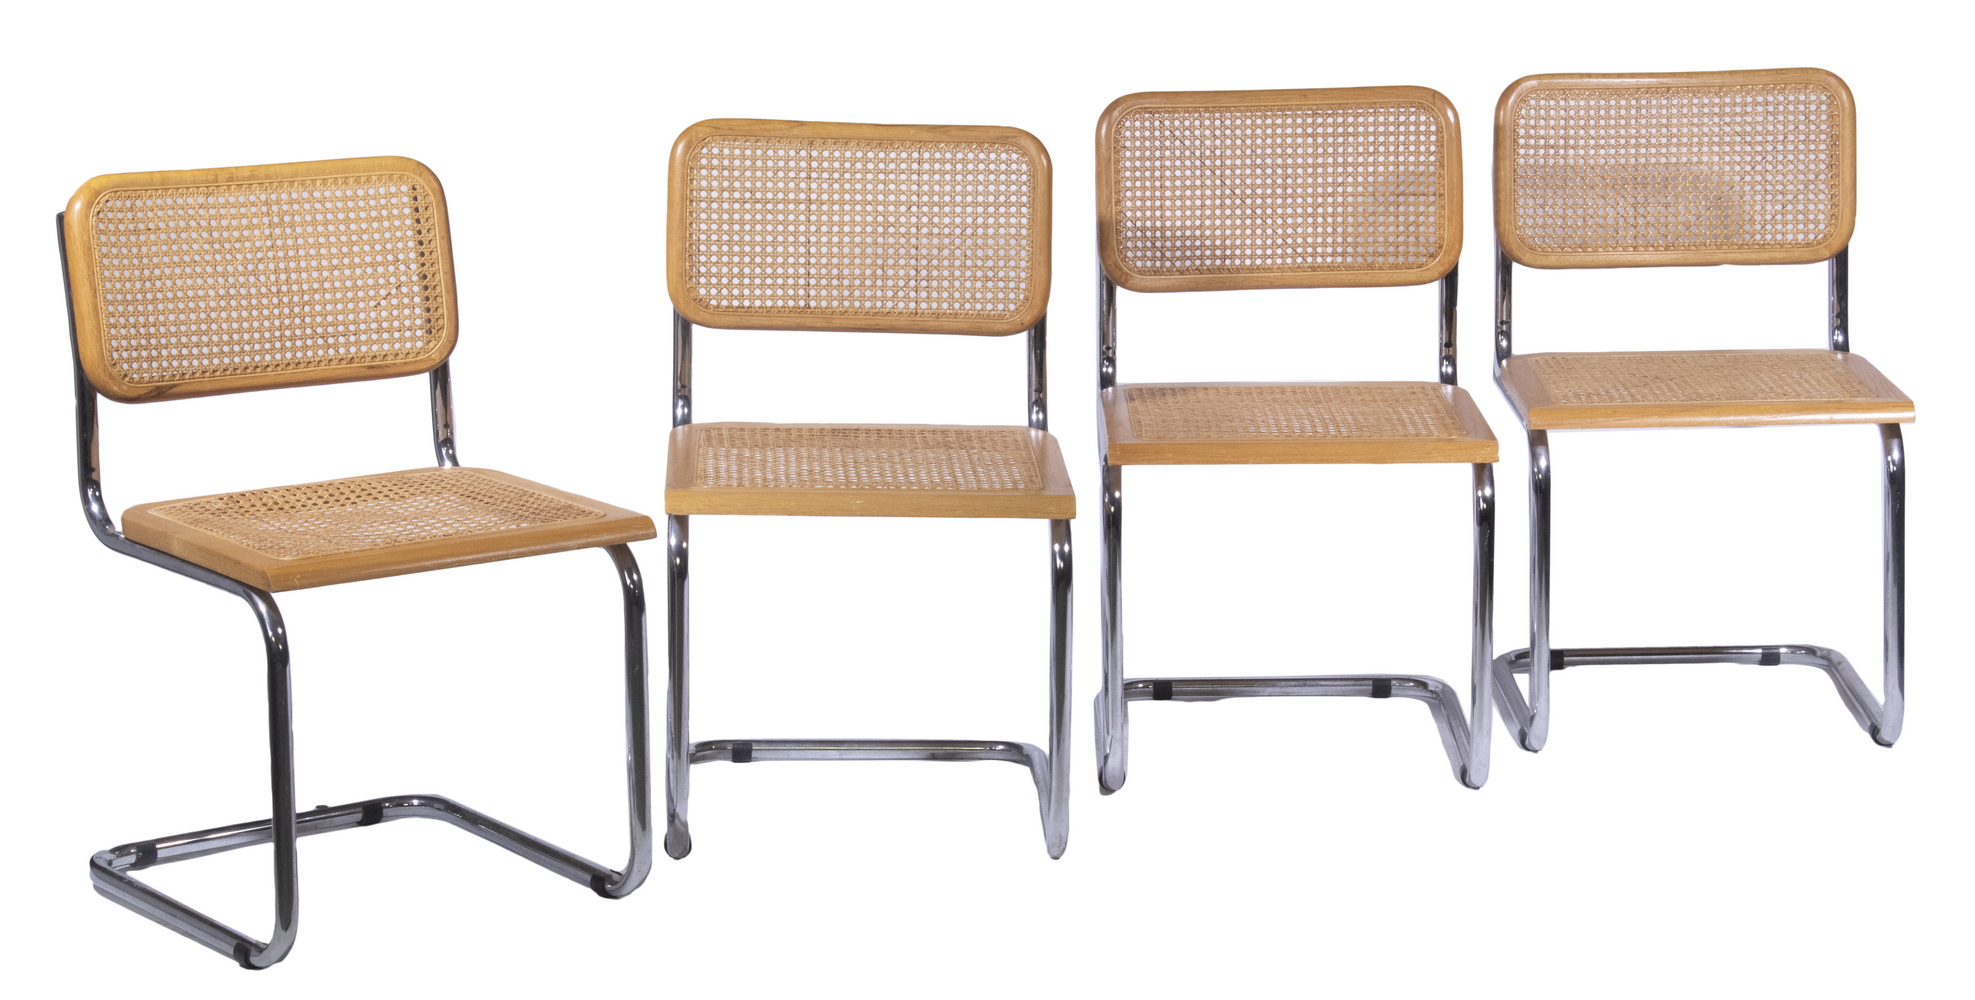 MODERNIST CANED SIDE CHAIRS Set 30242d